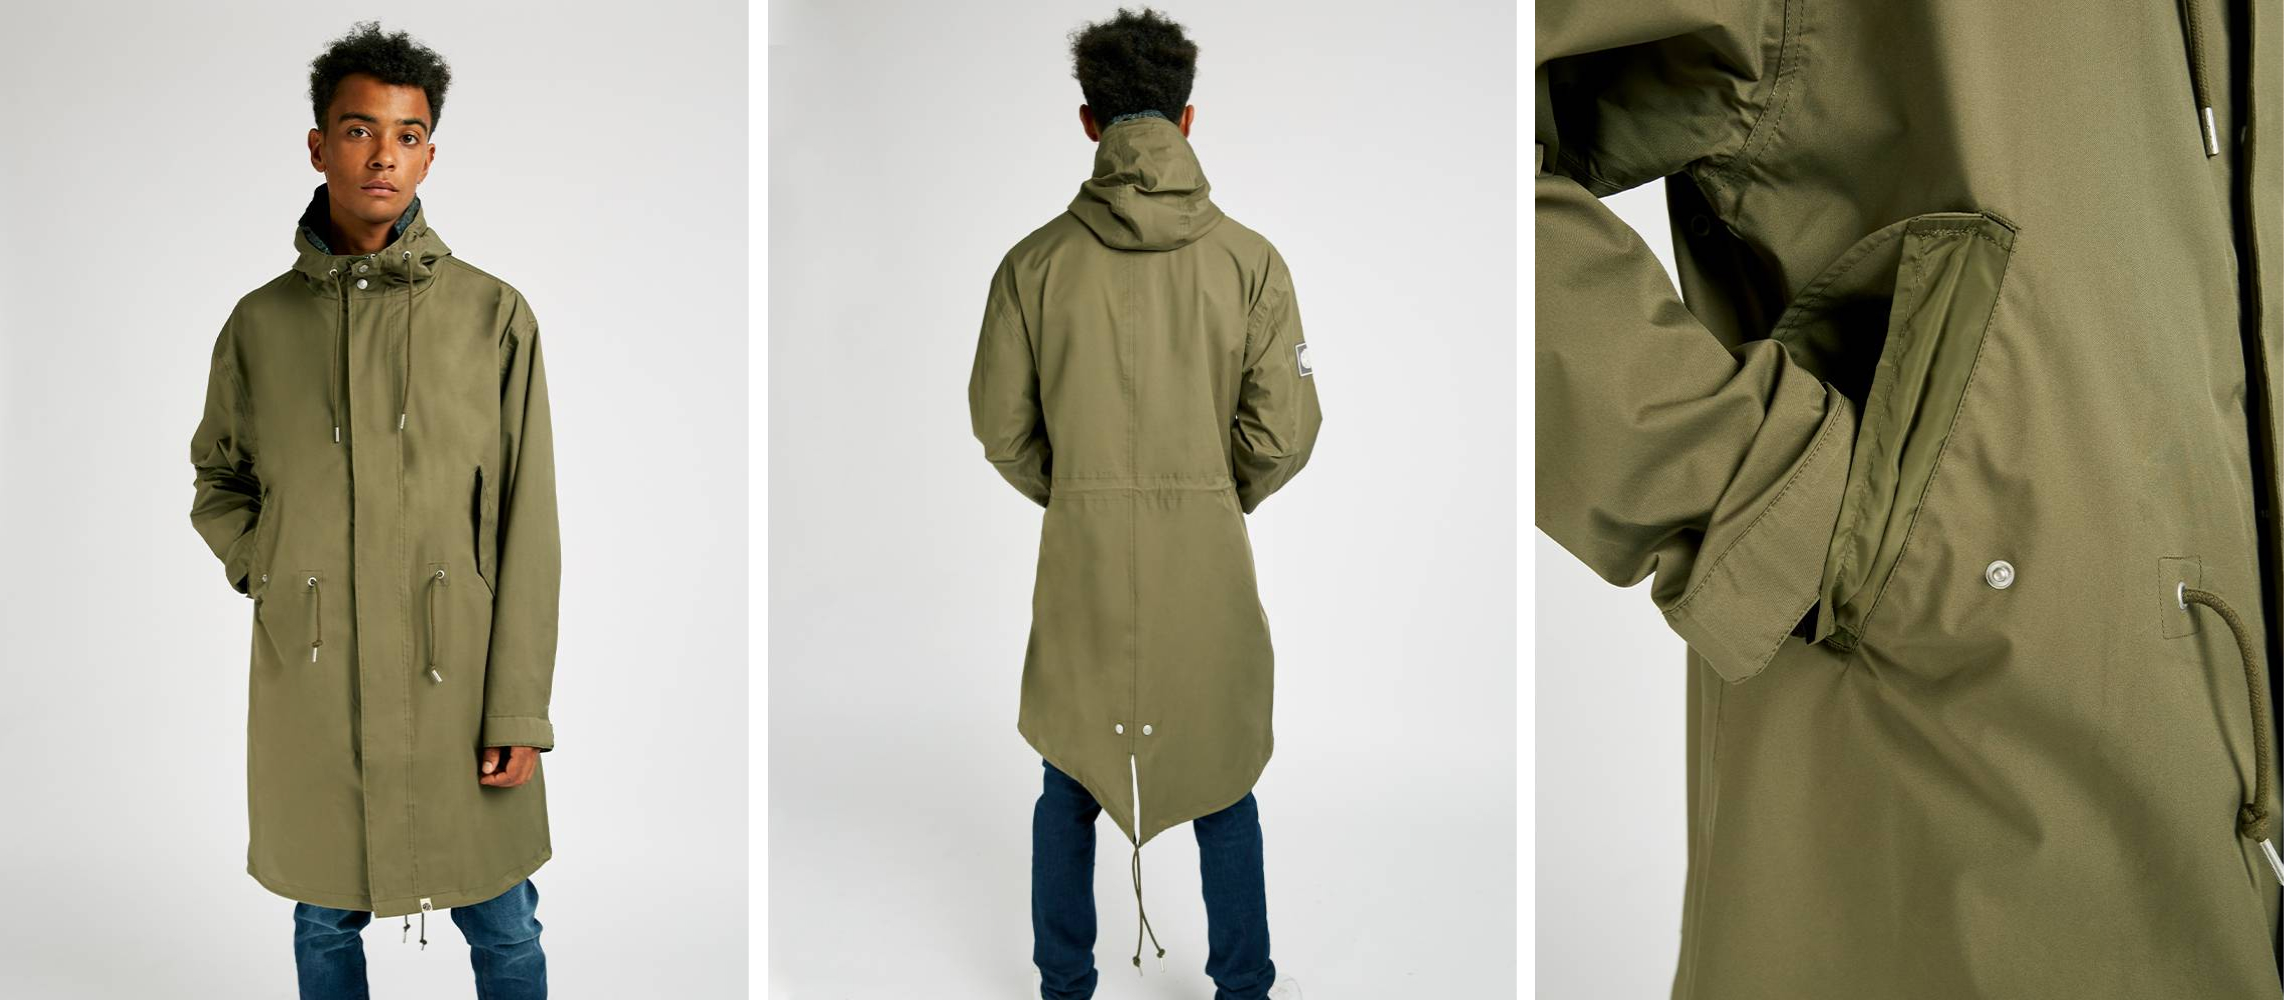 https://www.prettygreen.com/products/mens-seam-sealed-technical-parka-2635/?color=green&size=xs&utm_medium=Organic&utm_source=Newsletter&utm_campaign=Outerwear